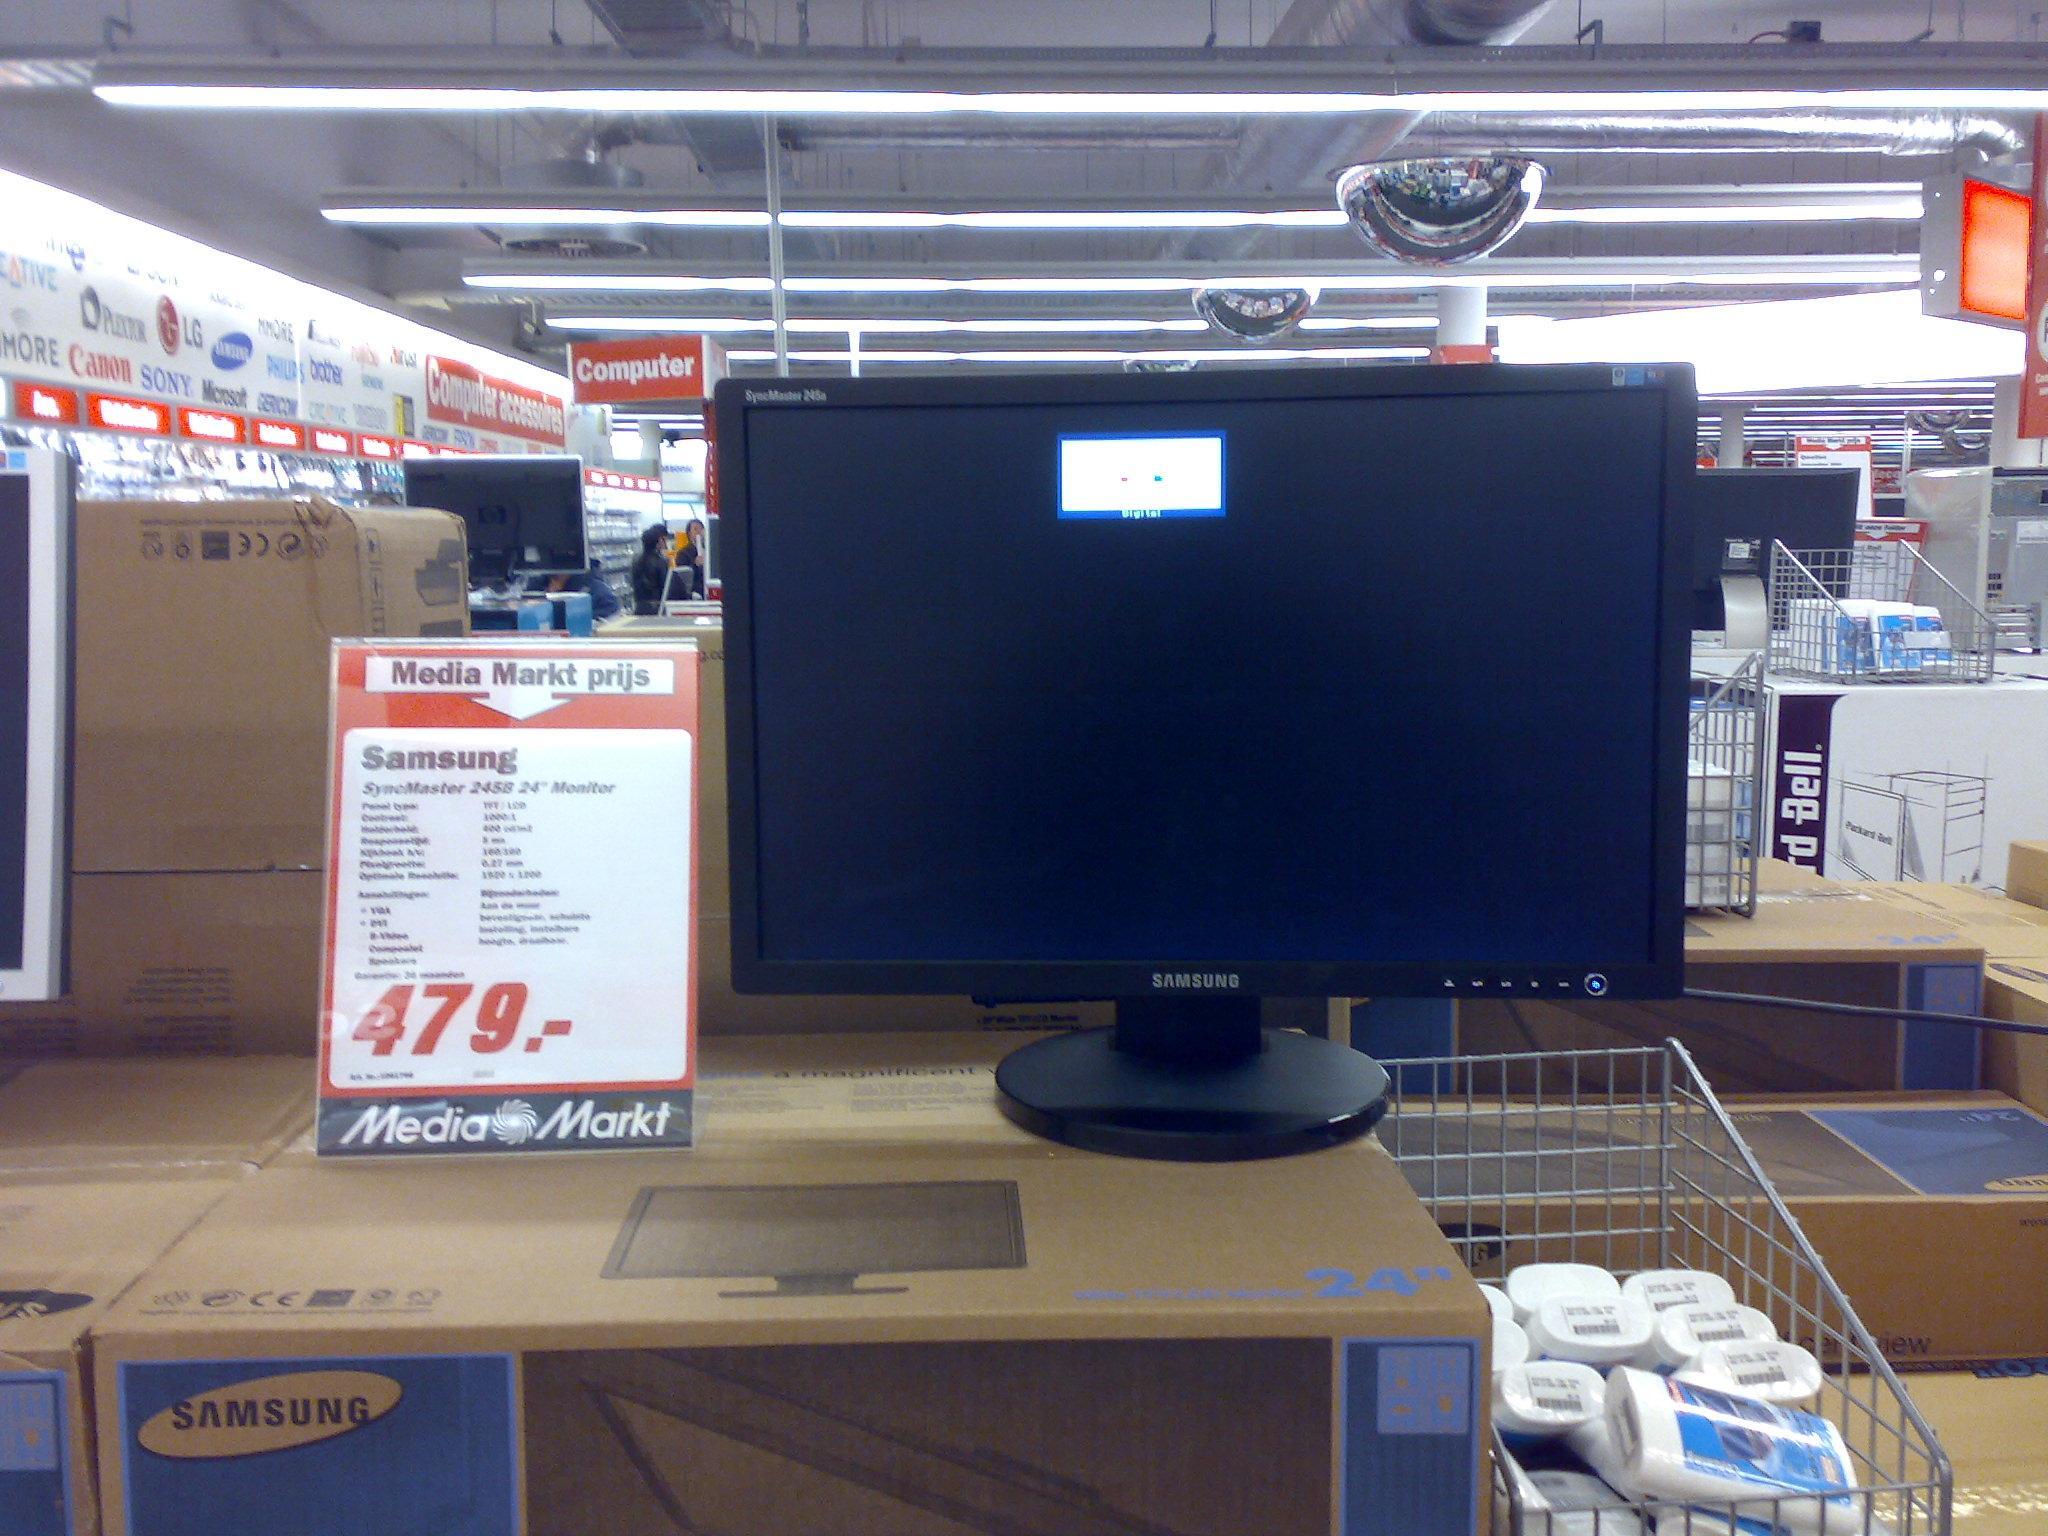 there are many large flat screen televisions at this store